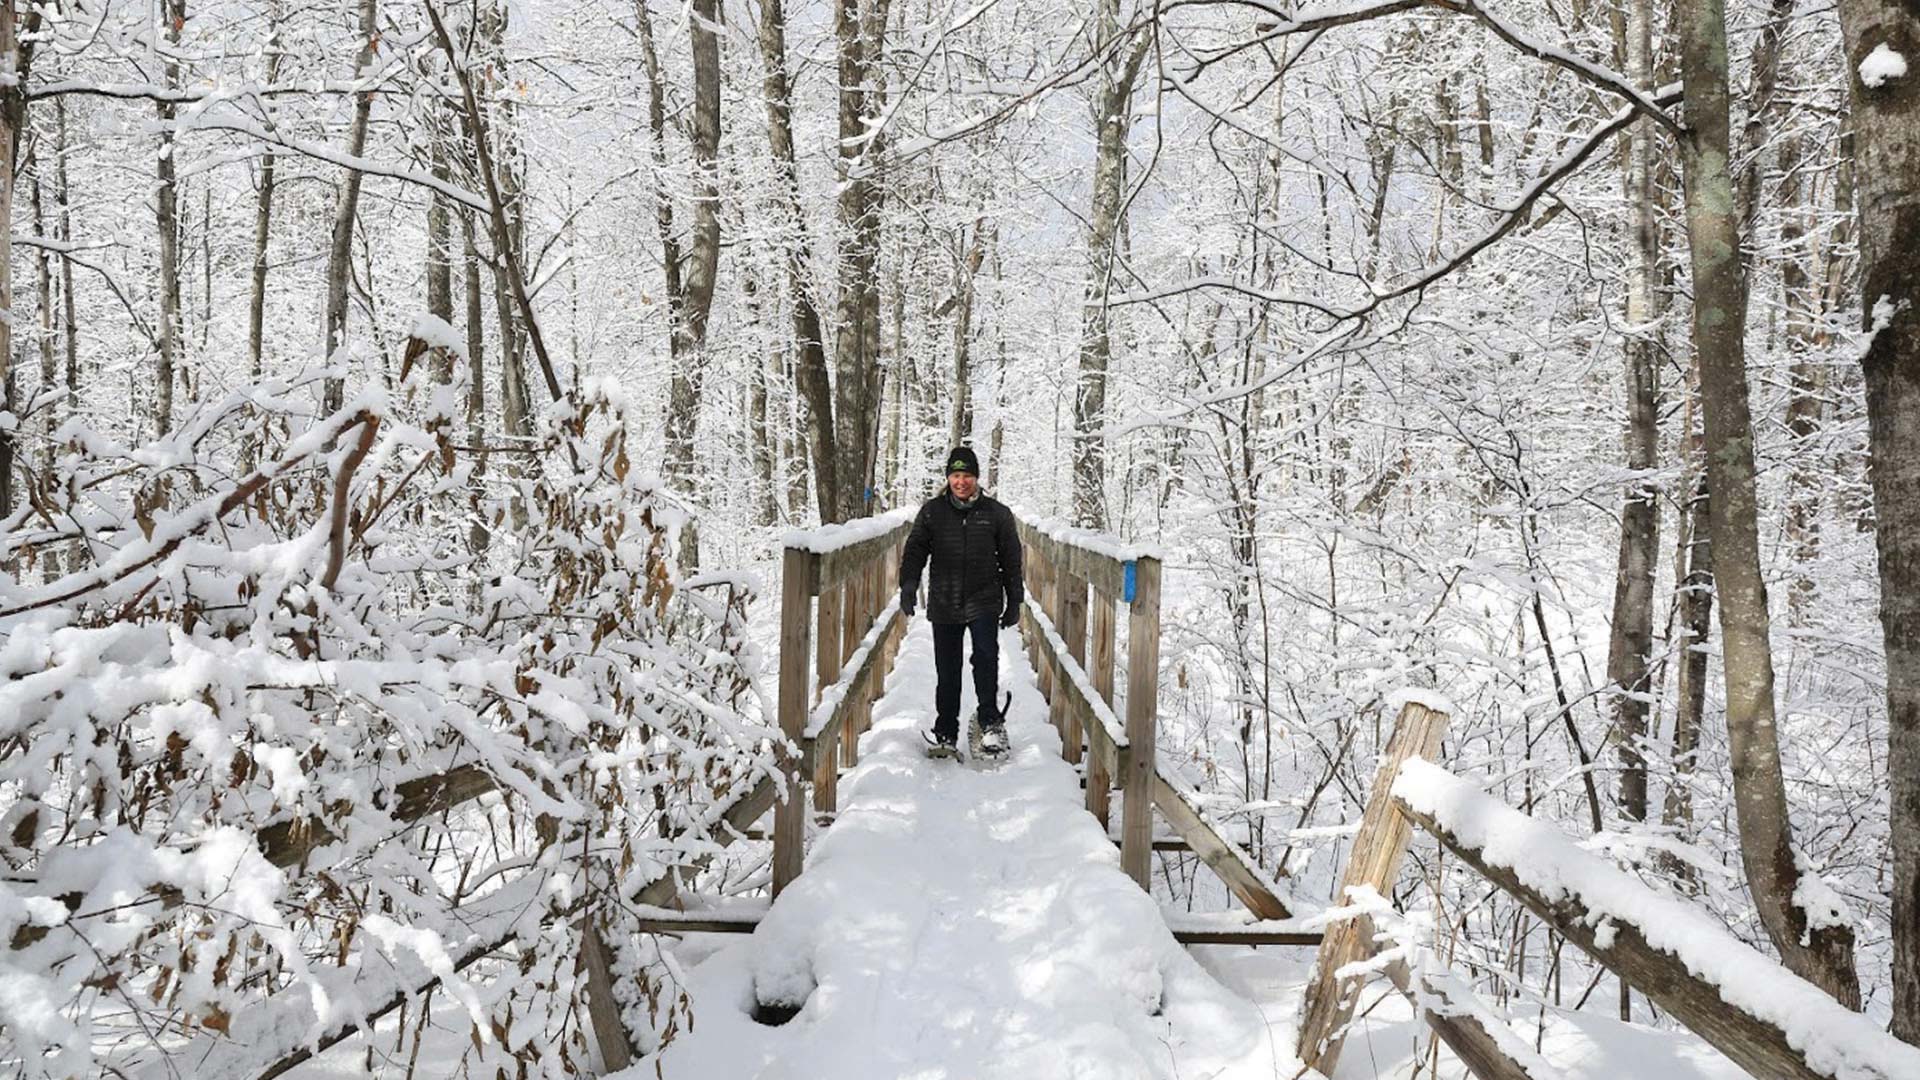 Find outdoor fun in Oneida County | Snowshoeing over a bridge on Washburn Trail